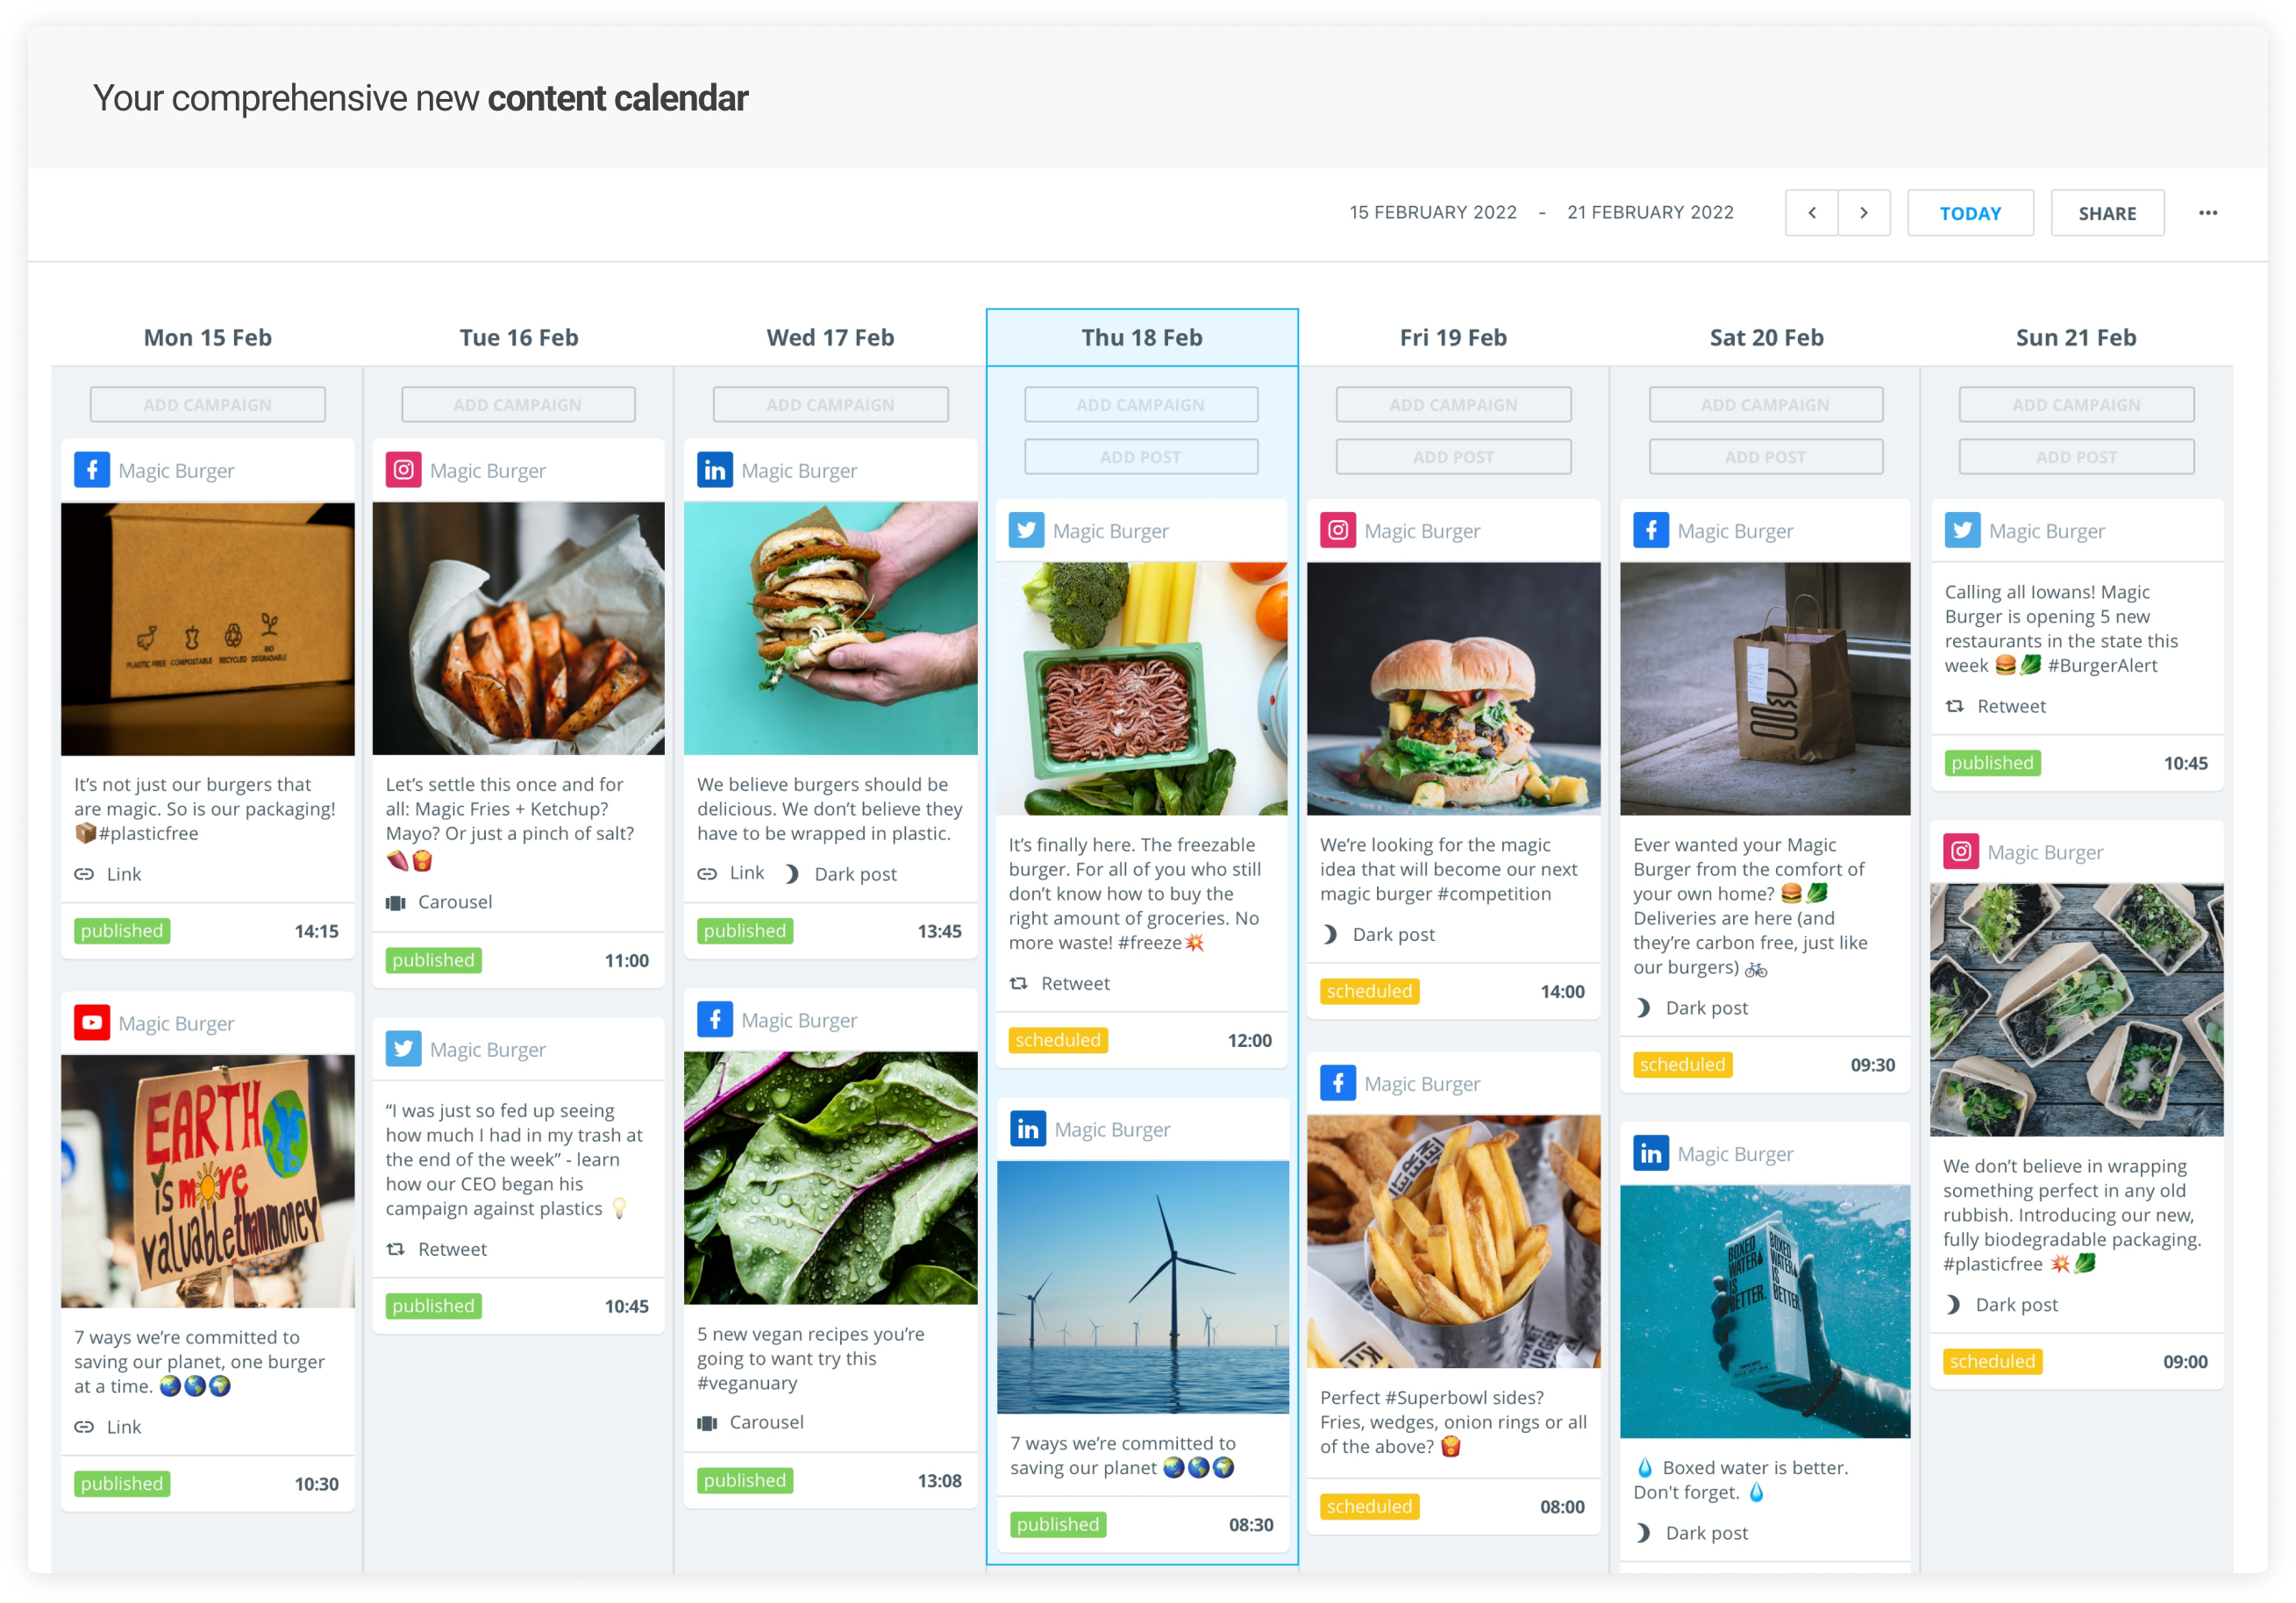 Falcon.io Software - Social Media Calendar - The calendar tool allows users to schedule social media posts and campaigns